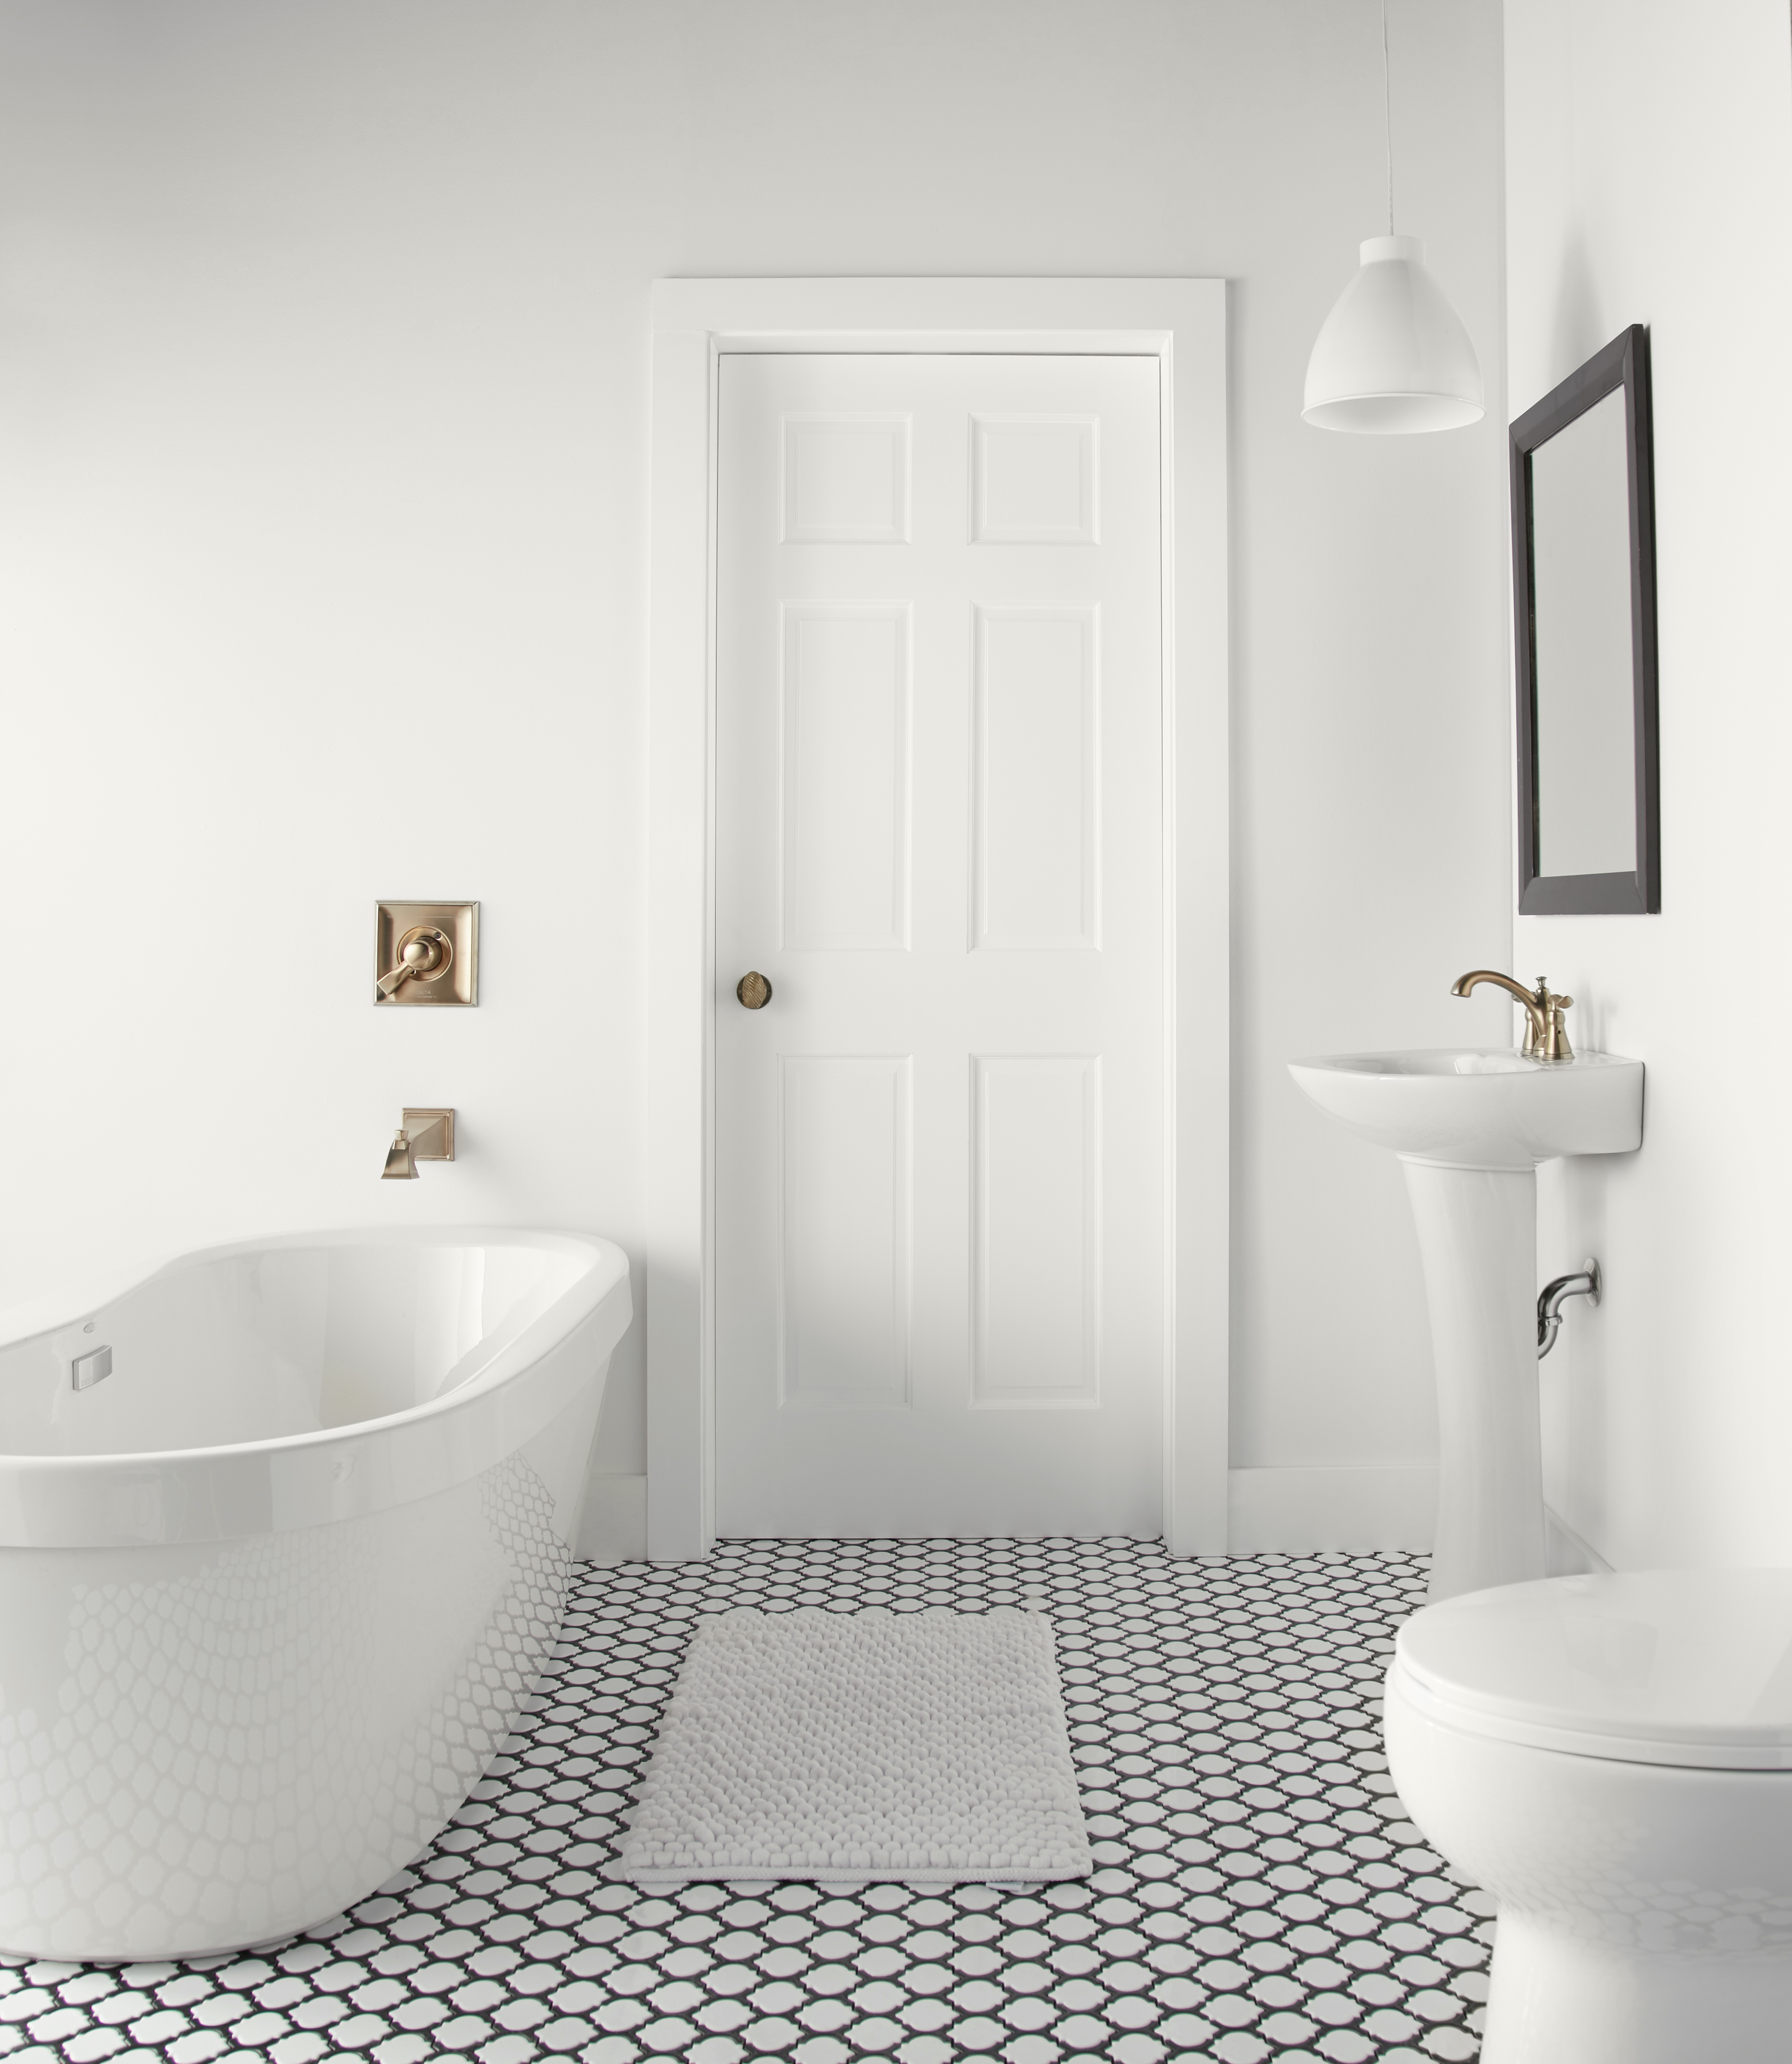 A modernized classic bathroom painted in all white paint.  The floor is black and white tile and the overall look of the room is clean and spacious.   